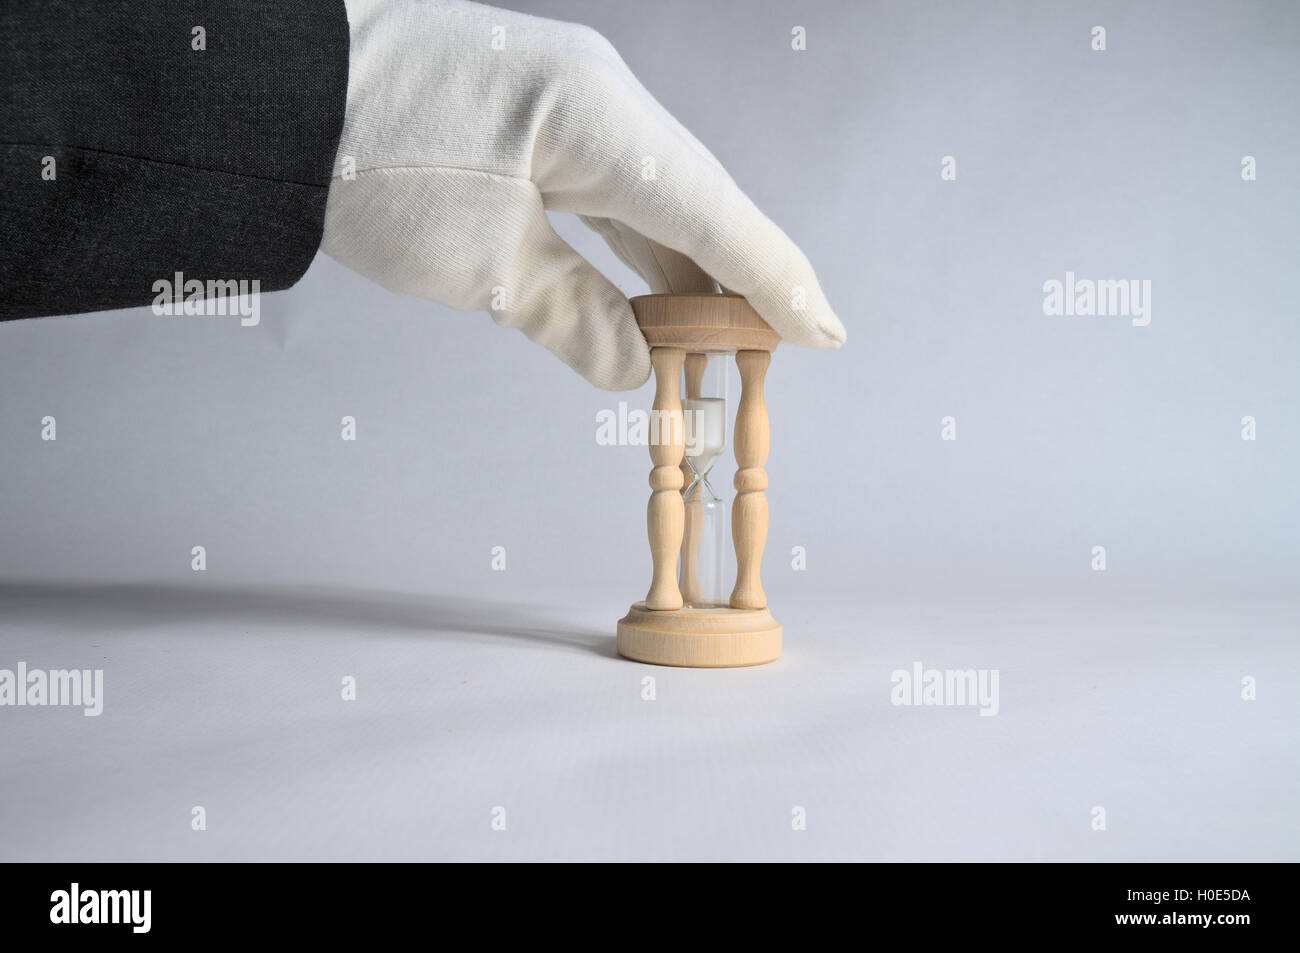 White glove touching an hourglass. Business and accommodation industry theme Stock Photo